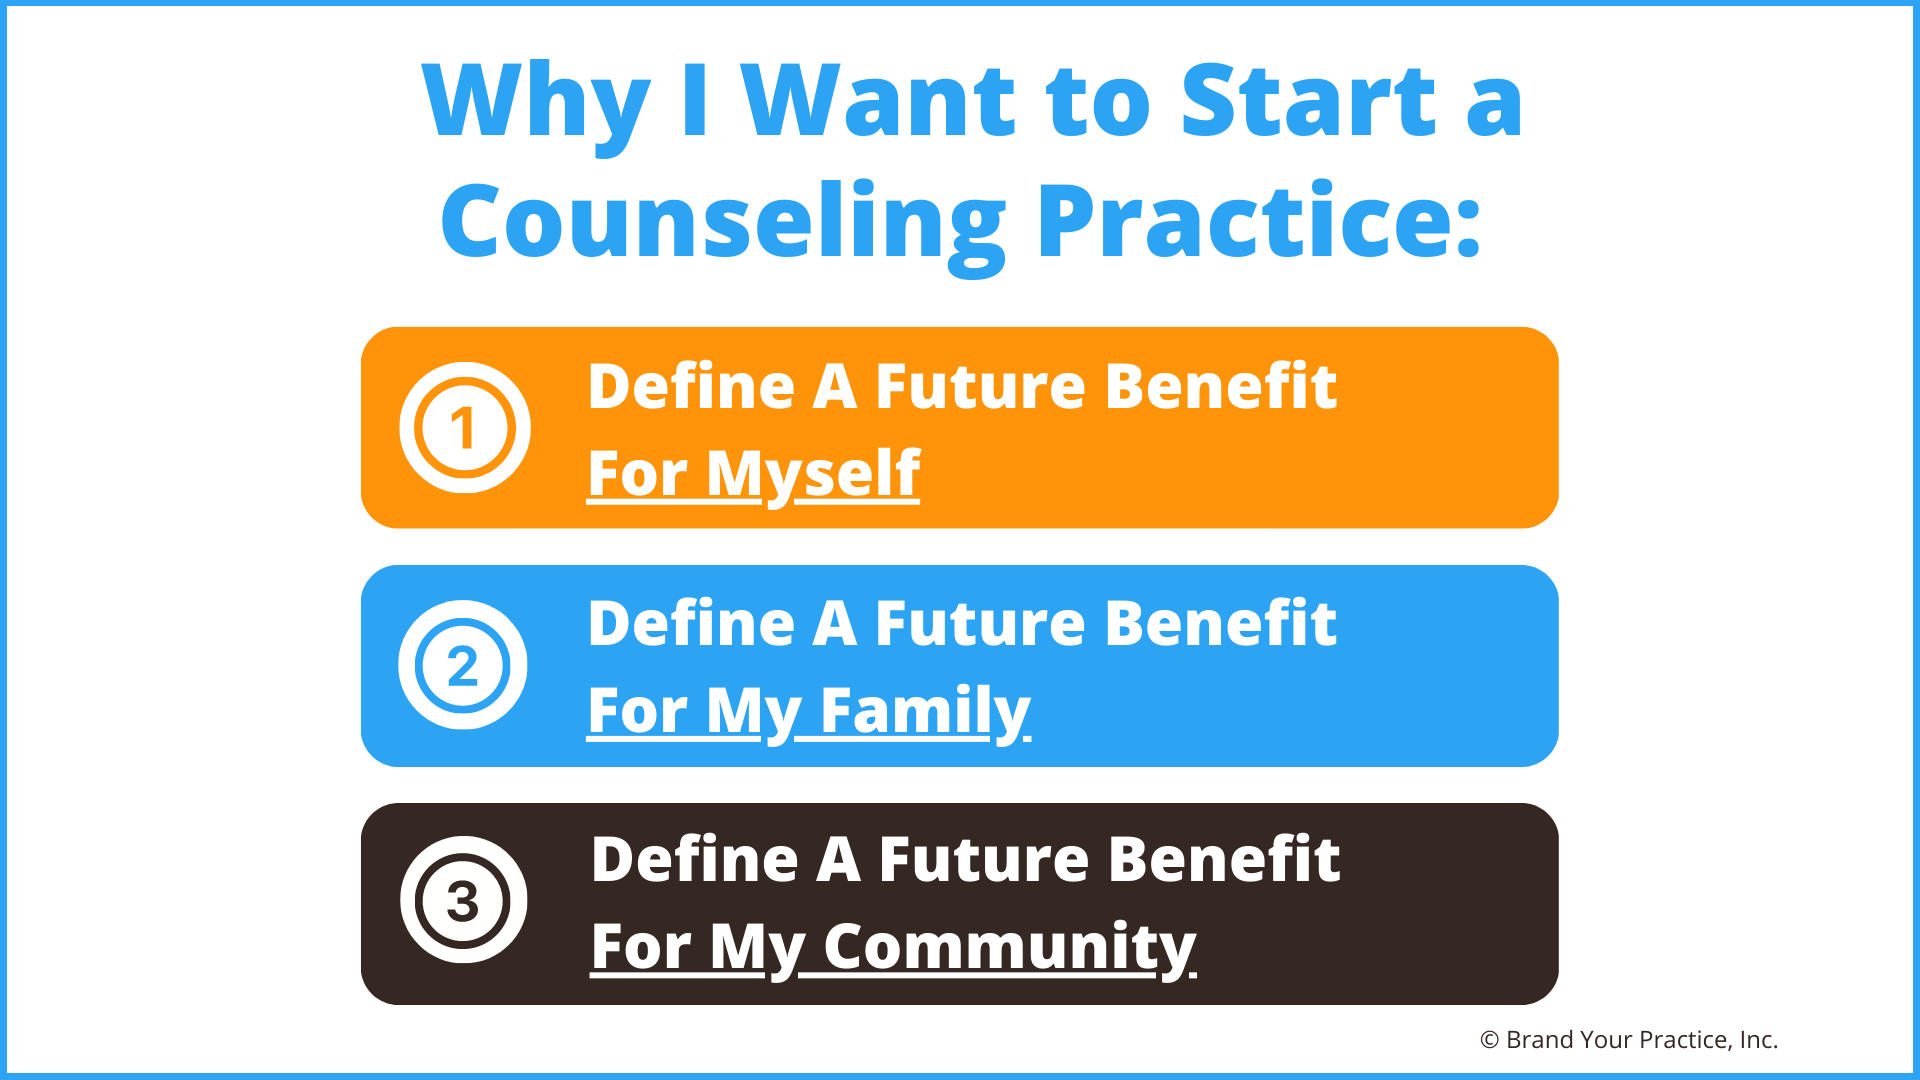 3 Reasons Why I Want to Start a Counseling Practice:<br /> 1. Define a Future Benefit for Myself<br /> 2. Define a Future Benefit for My Family<br /> 3. Define a Future Benefit for My Community